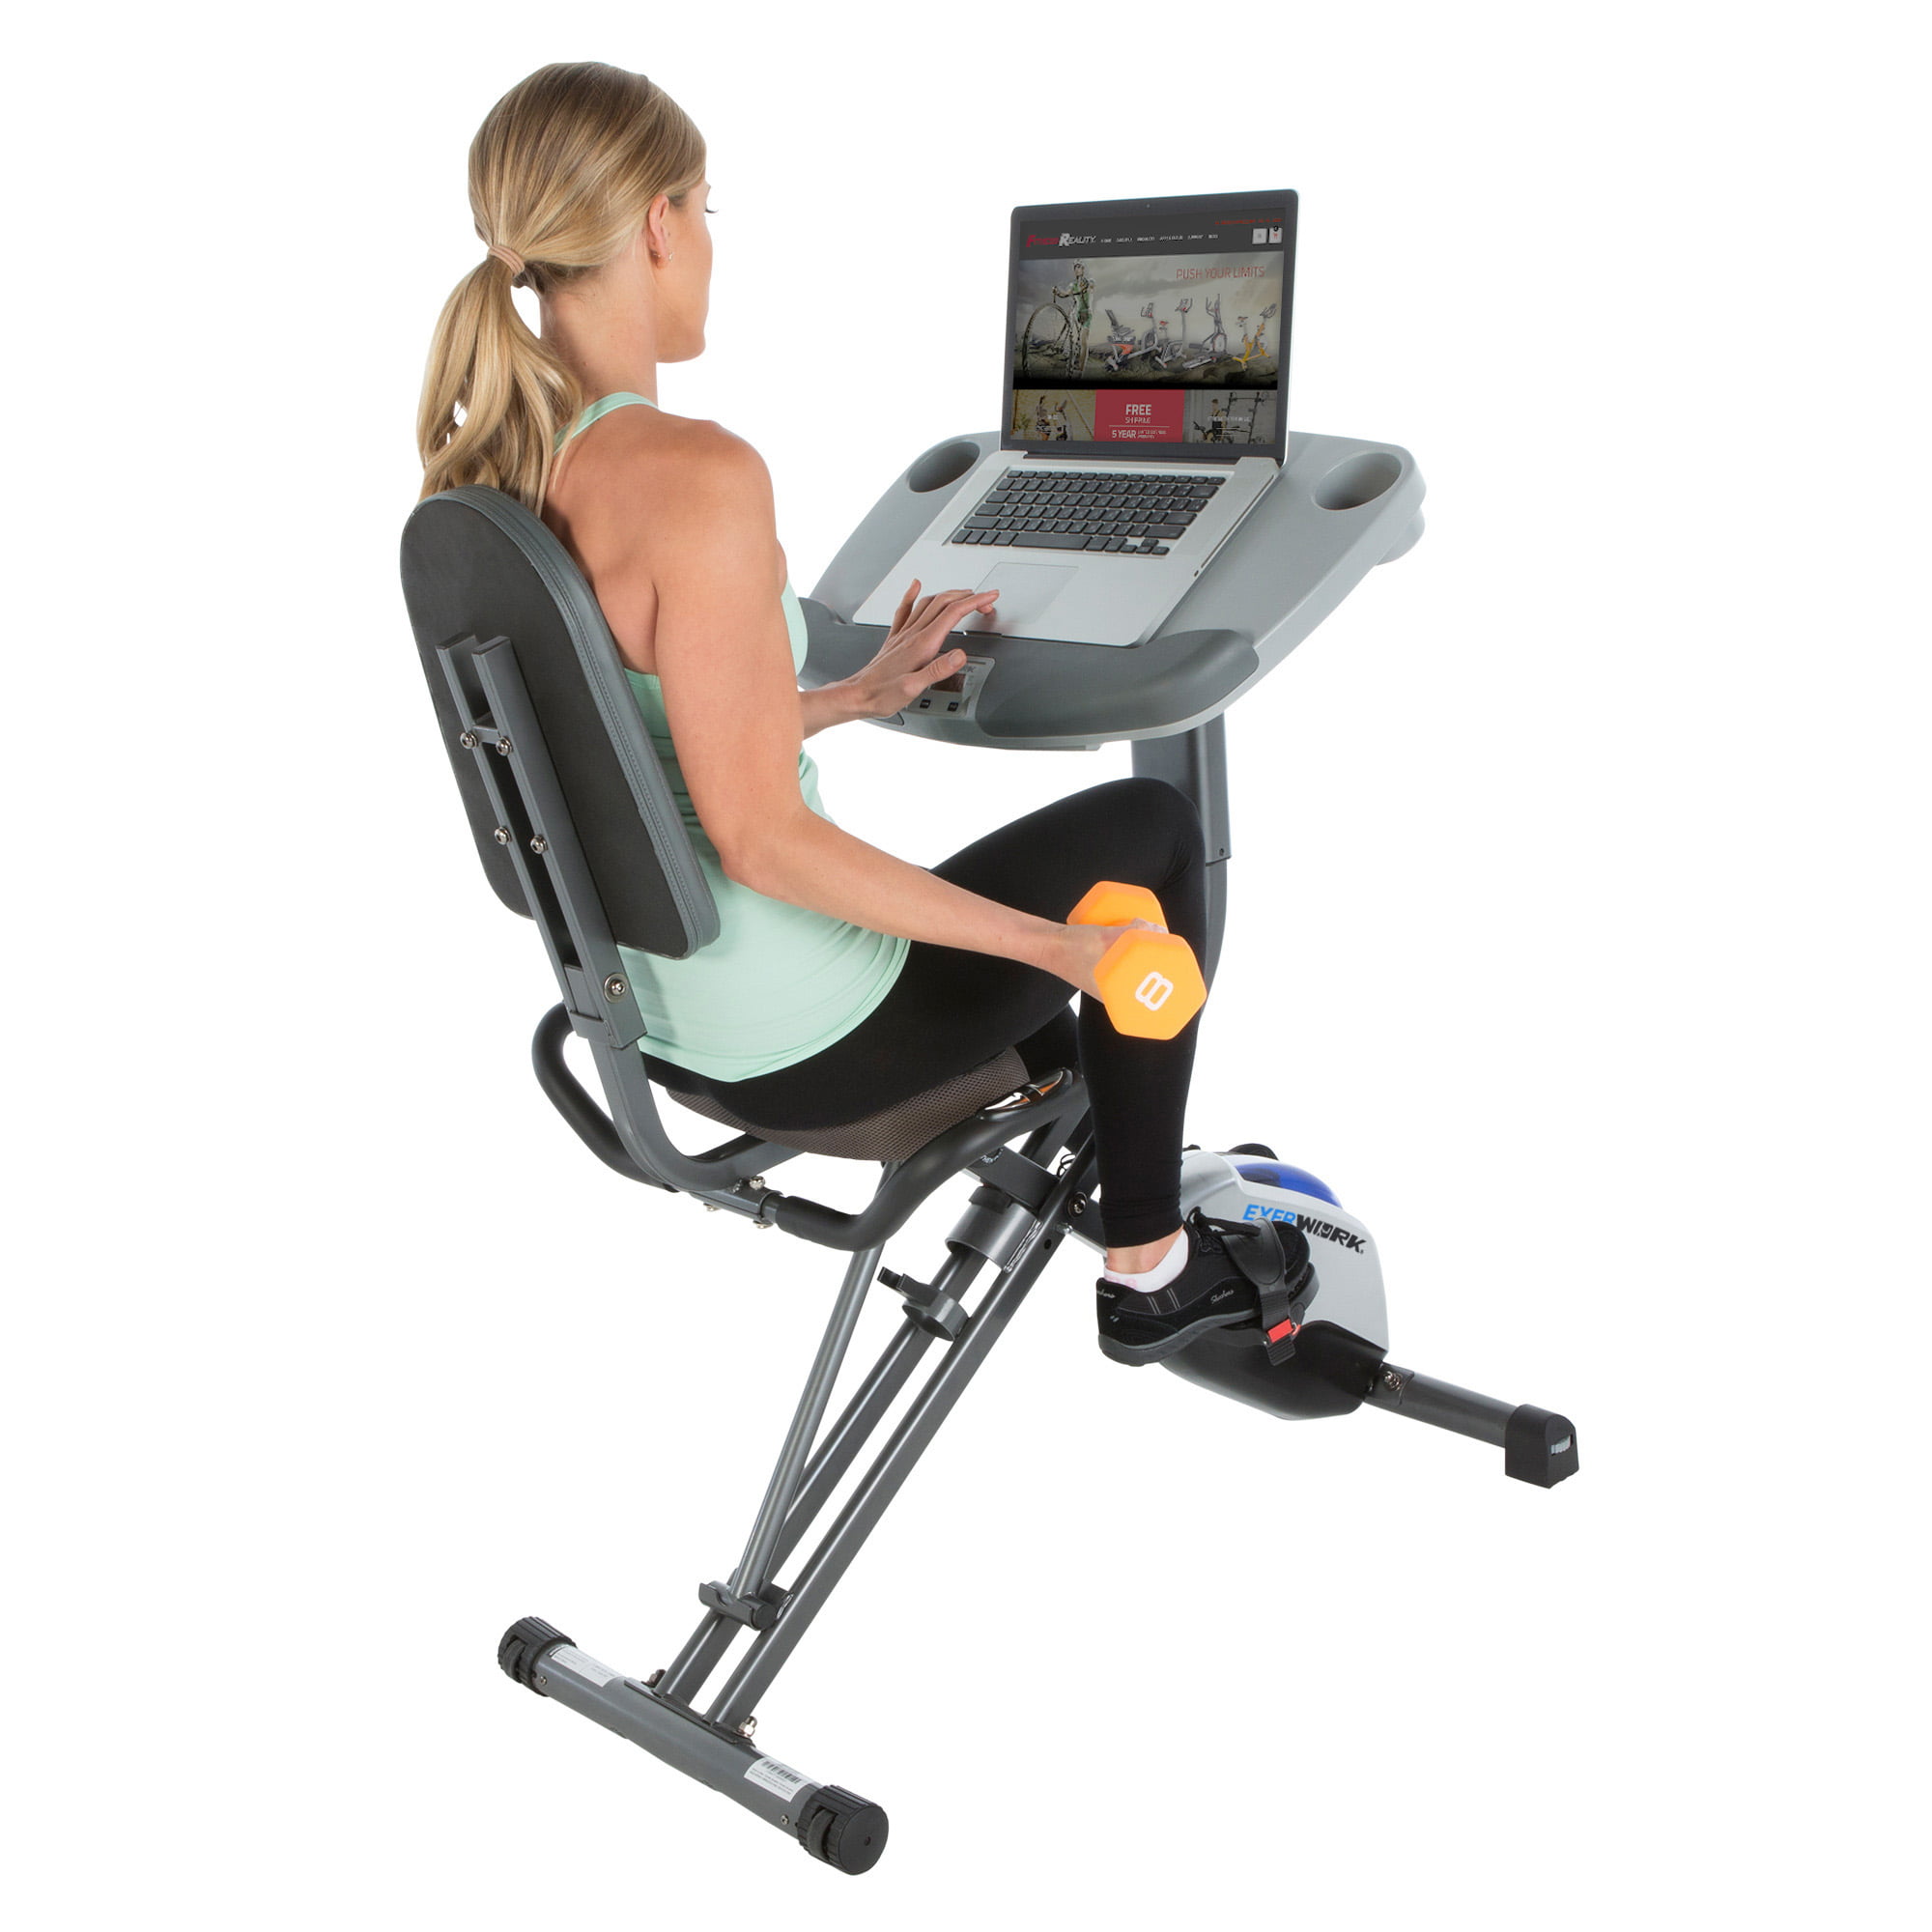 Exerpeutic Workfit 1000 Fully Adjustable Desk Folding Exercise